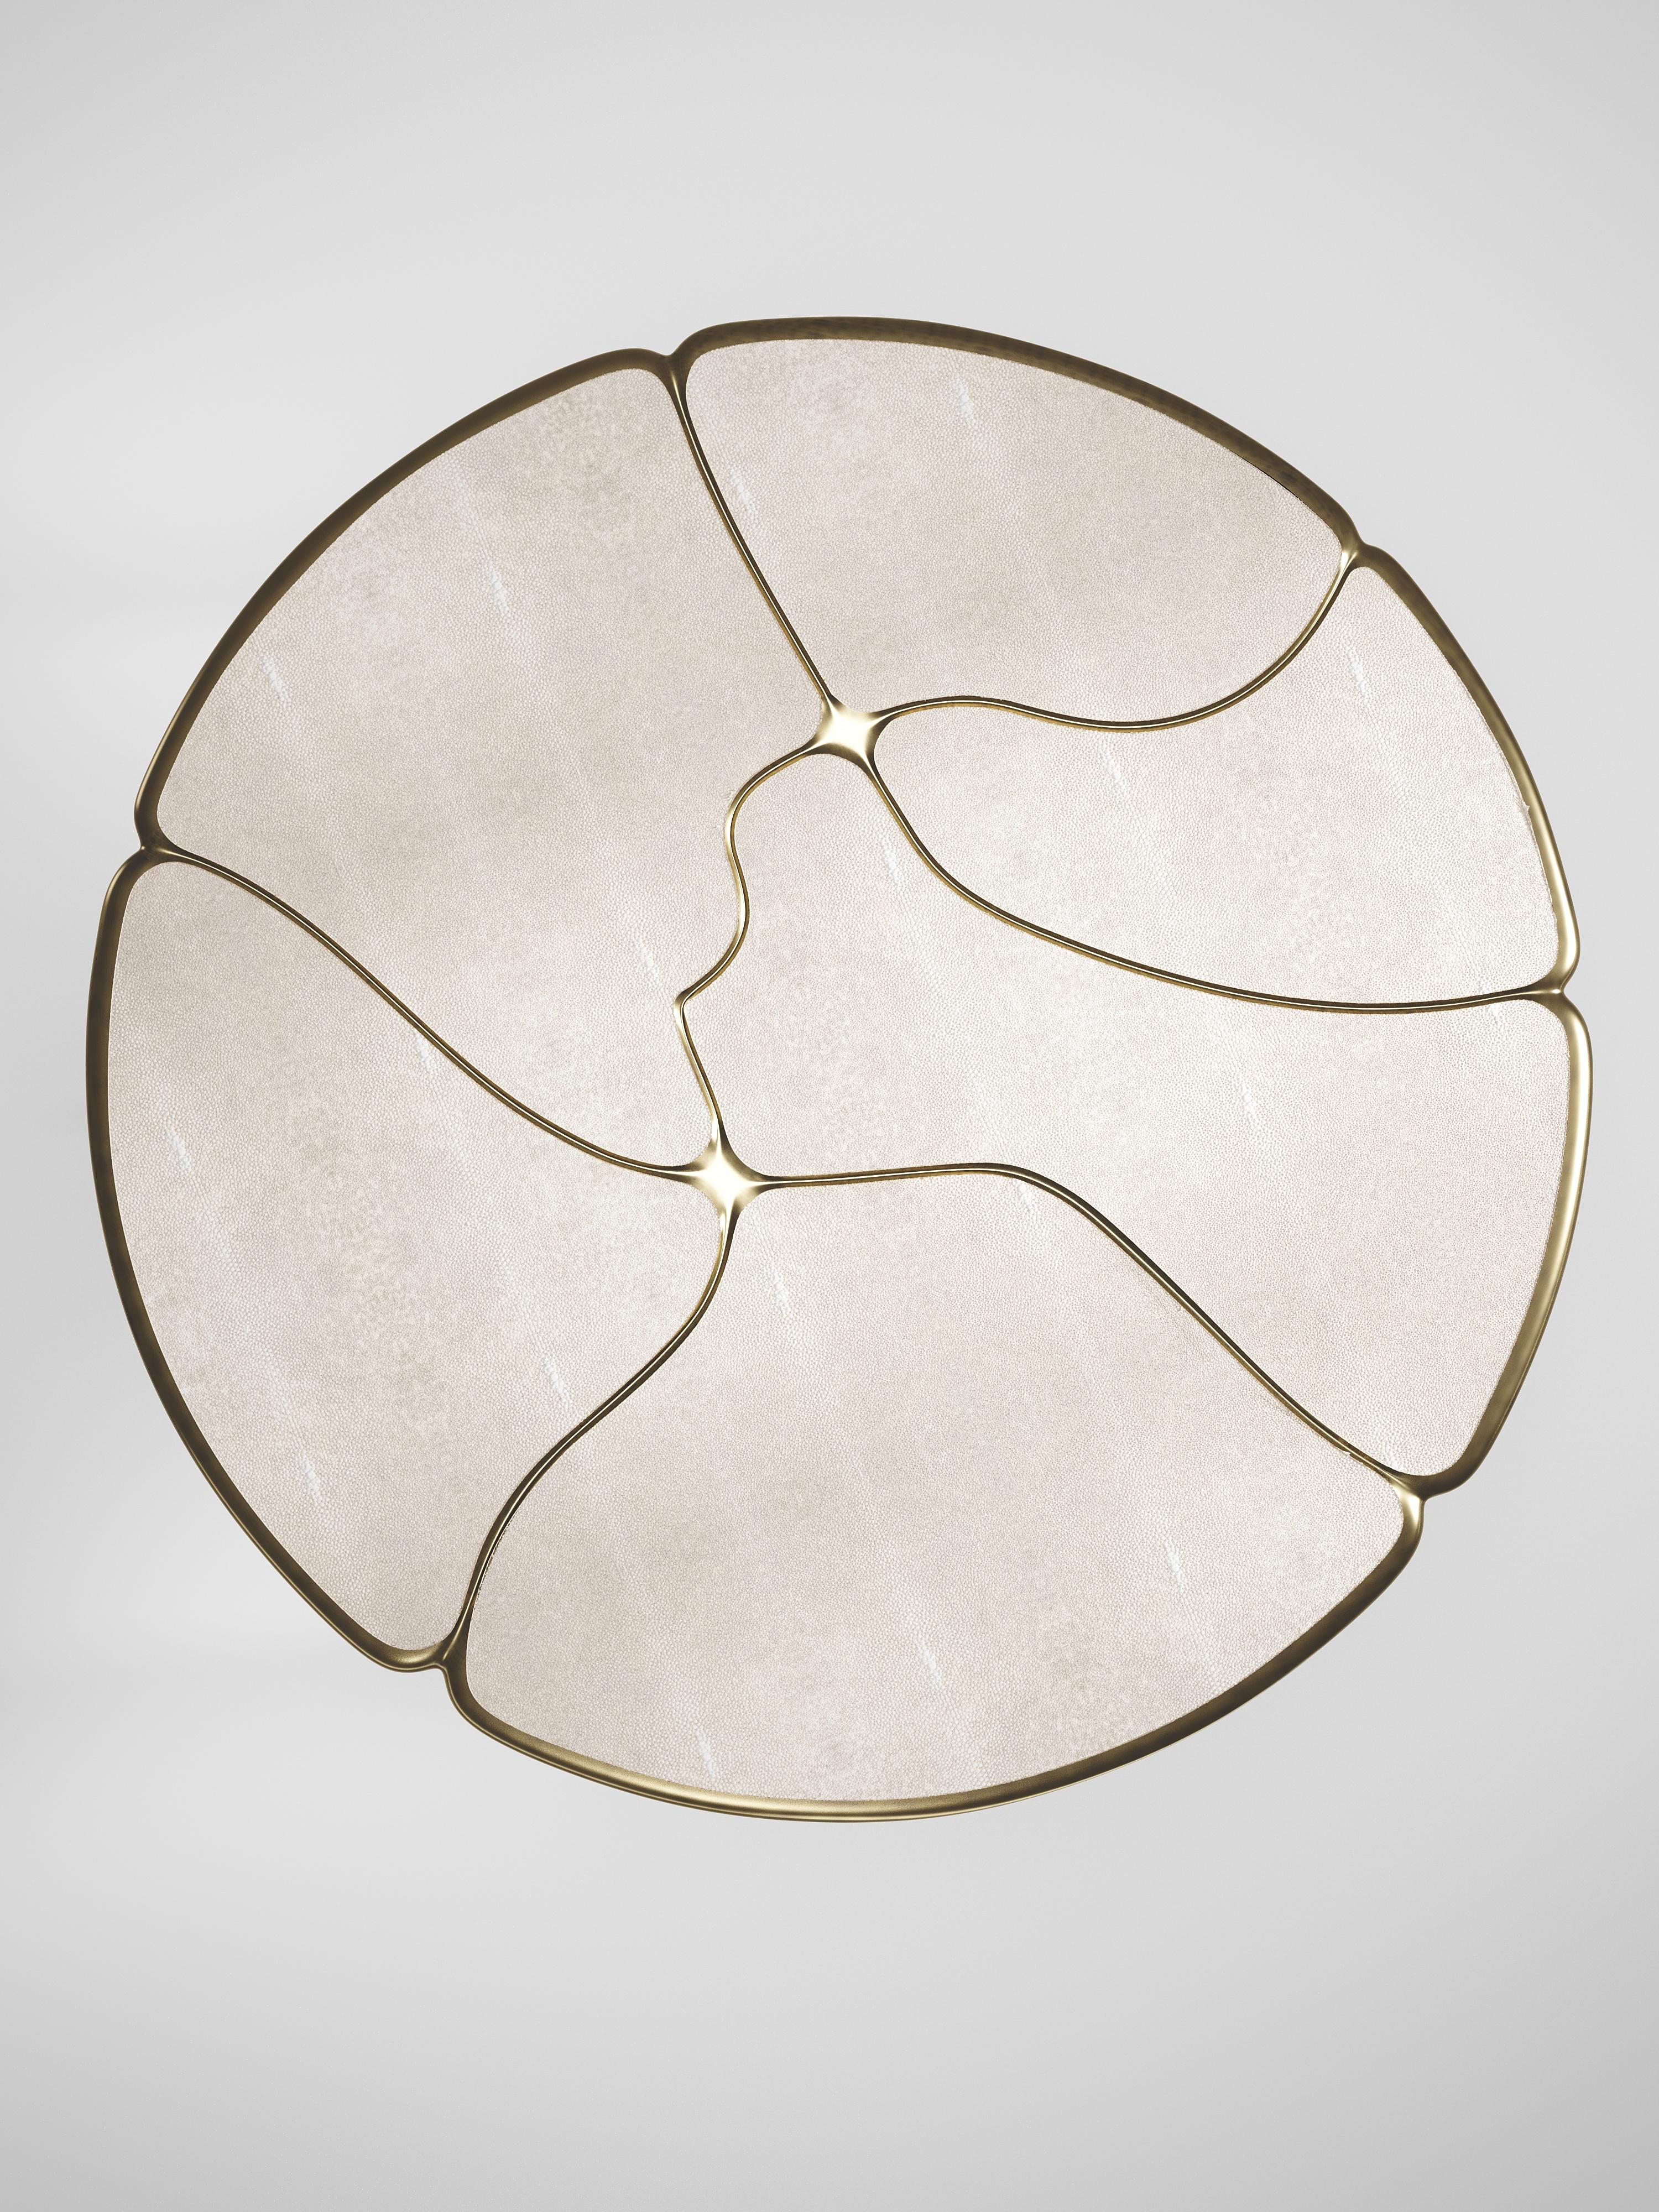 The Frequency breakfast table by R & Y Augousti is sleek piece with a vintage-modern feel. The piece explores fluid organic lines with subtle detailing to create the signature Augousti aesthetic. The piece is inlaid in a mixture of cream shagreen